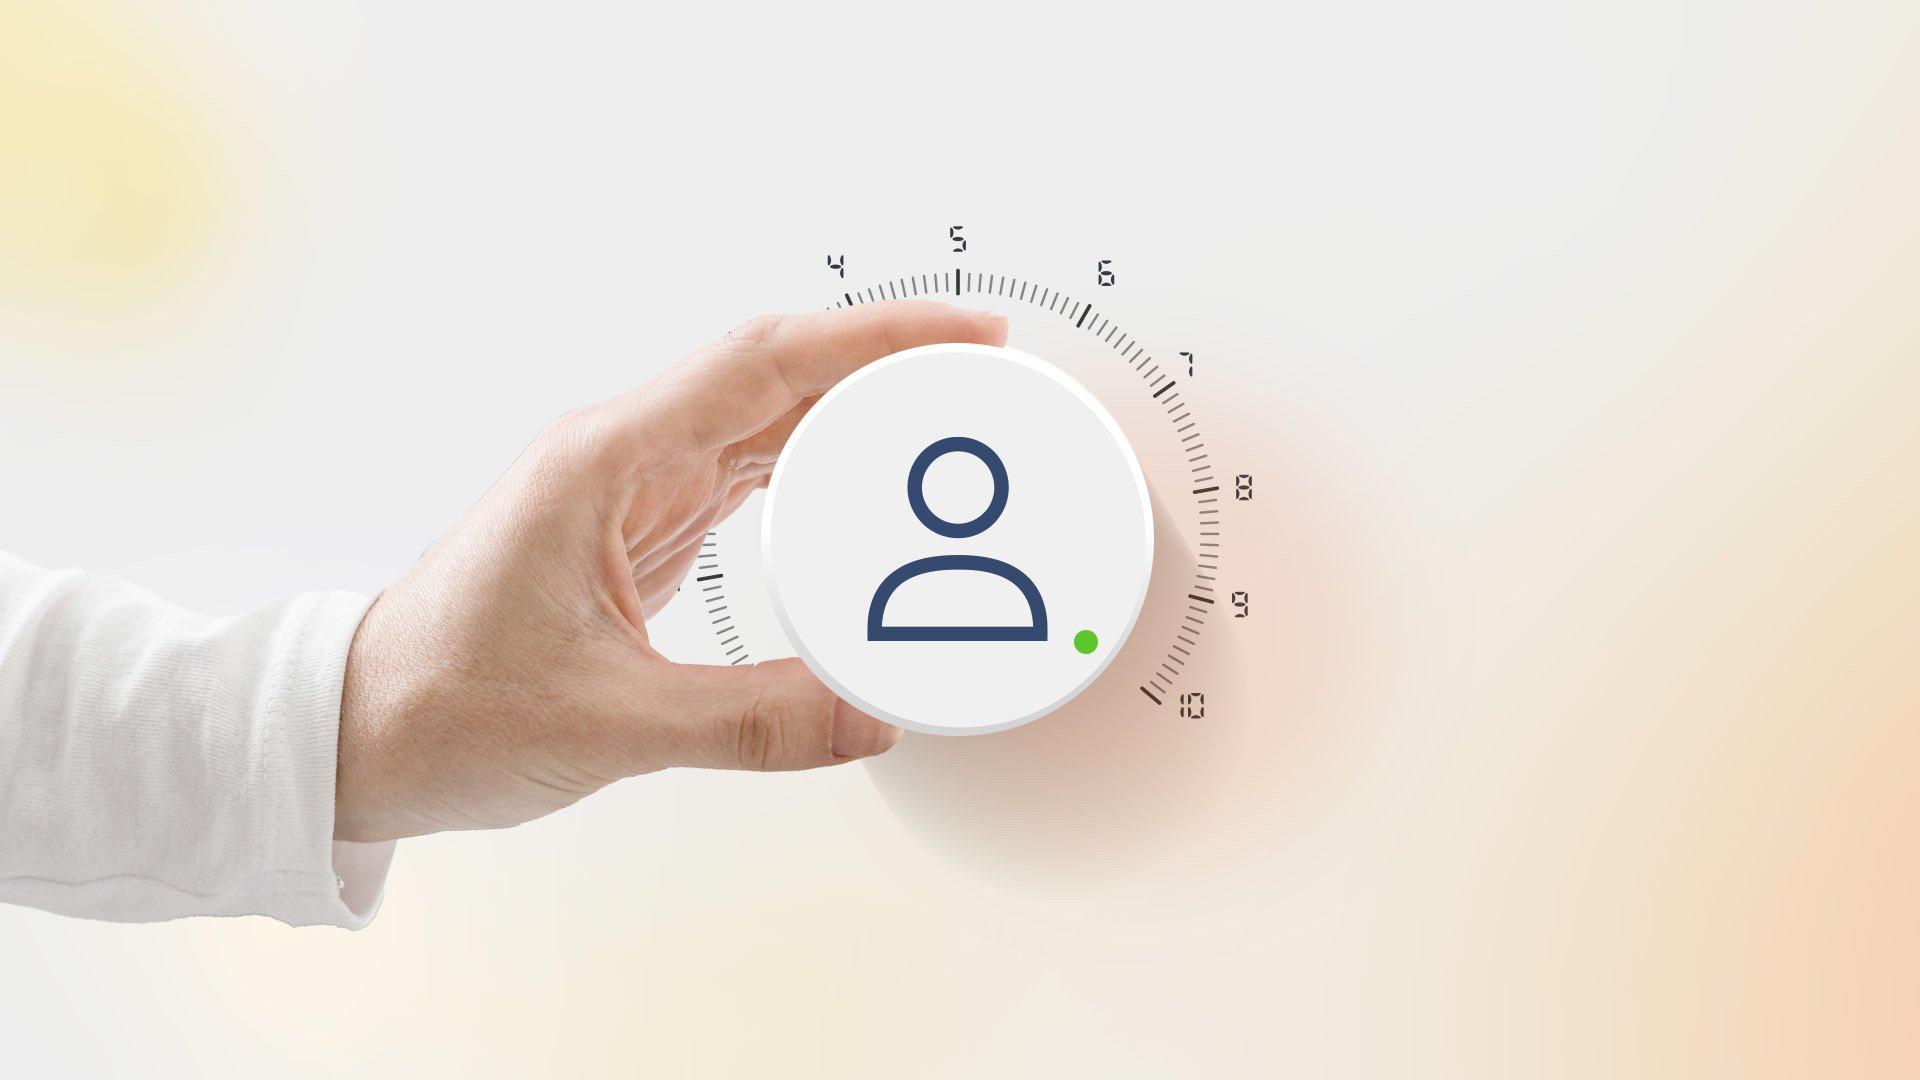 Graphic shows hand holding a thermostat, that has a person icon and green dot, set to 10